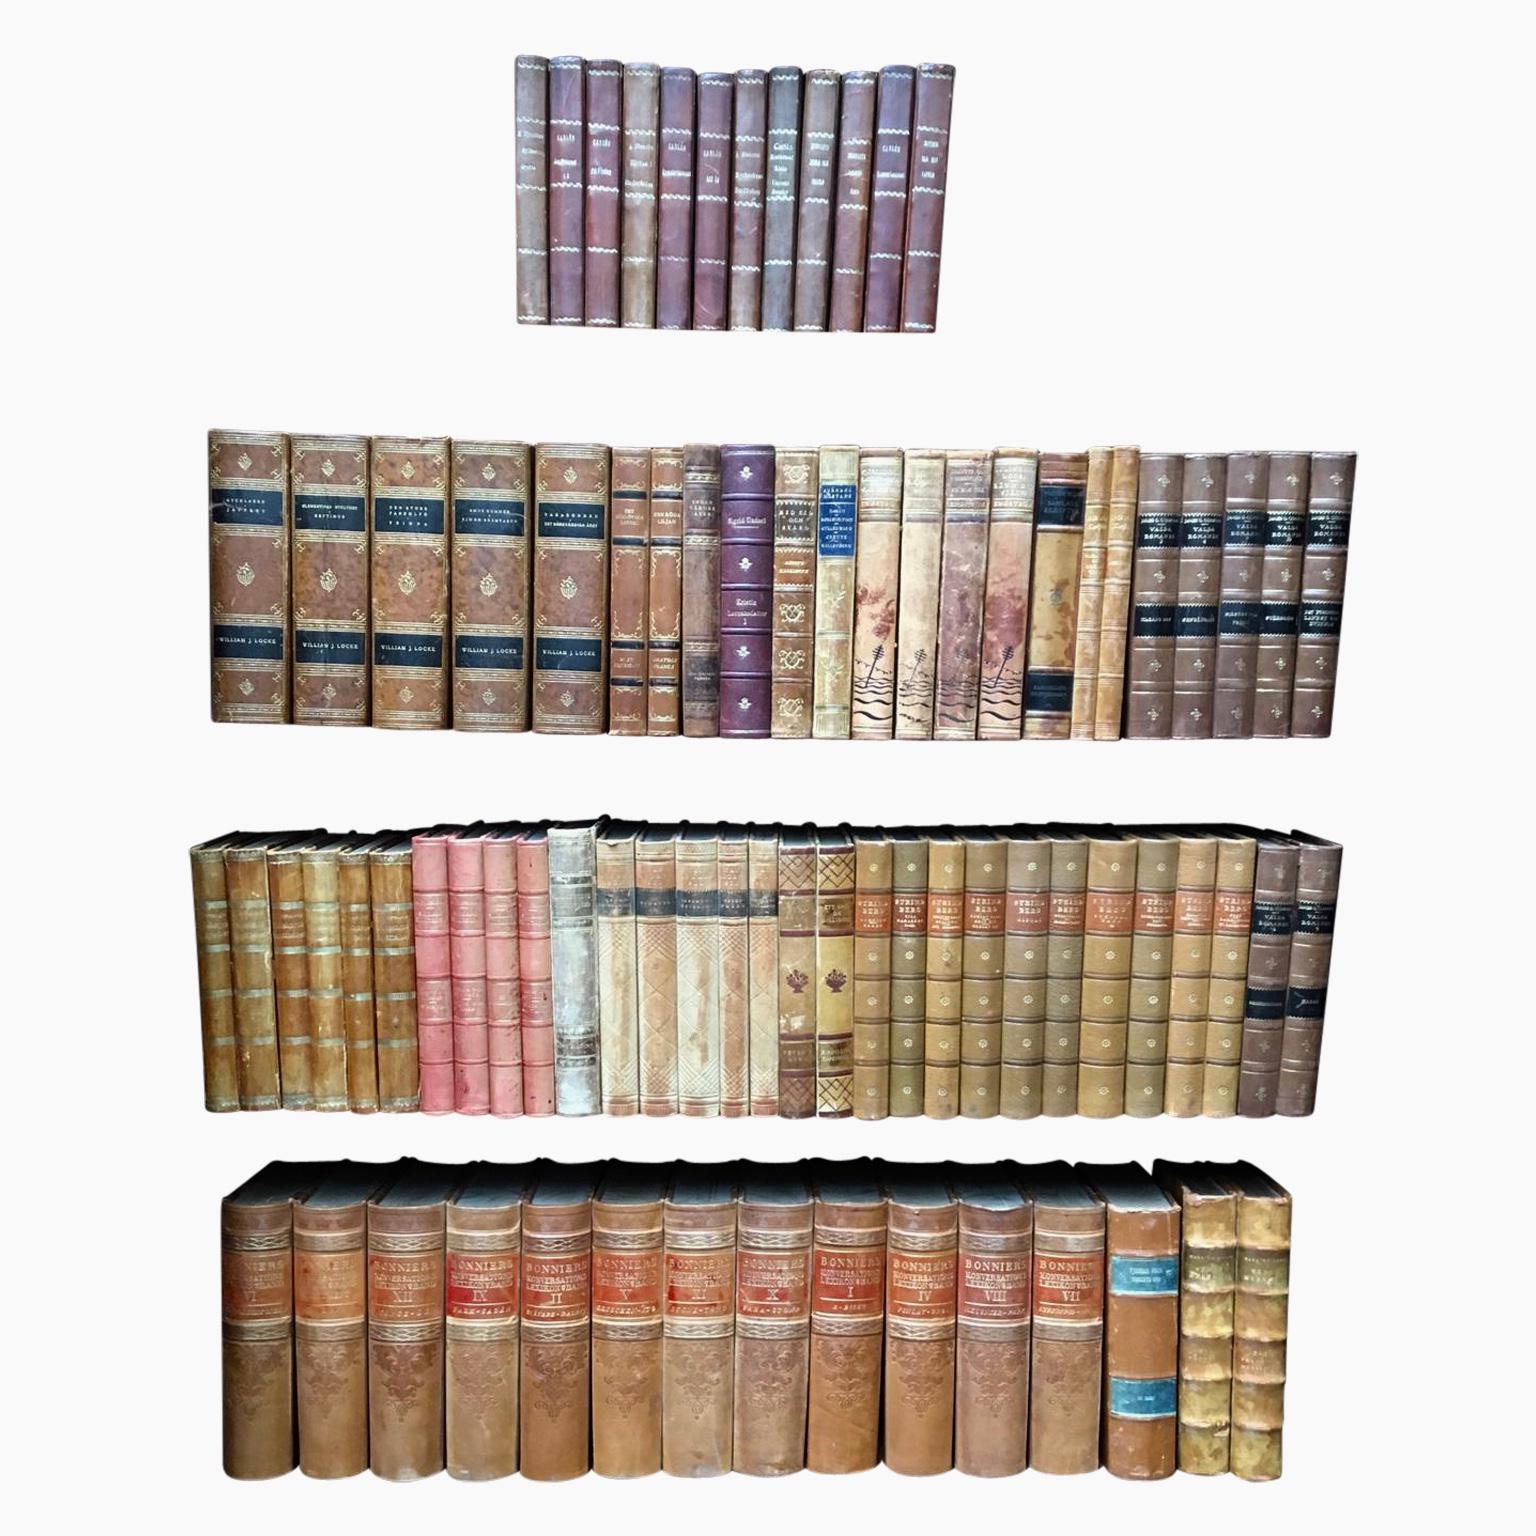 Part of a large collection of Scandinavian decorative antique library leather-bound books

This set of 112 books are part of a large and attractive collection of 2500 mid-size antique leather-bound books. This lot of books on literature from Sweden